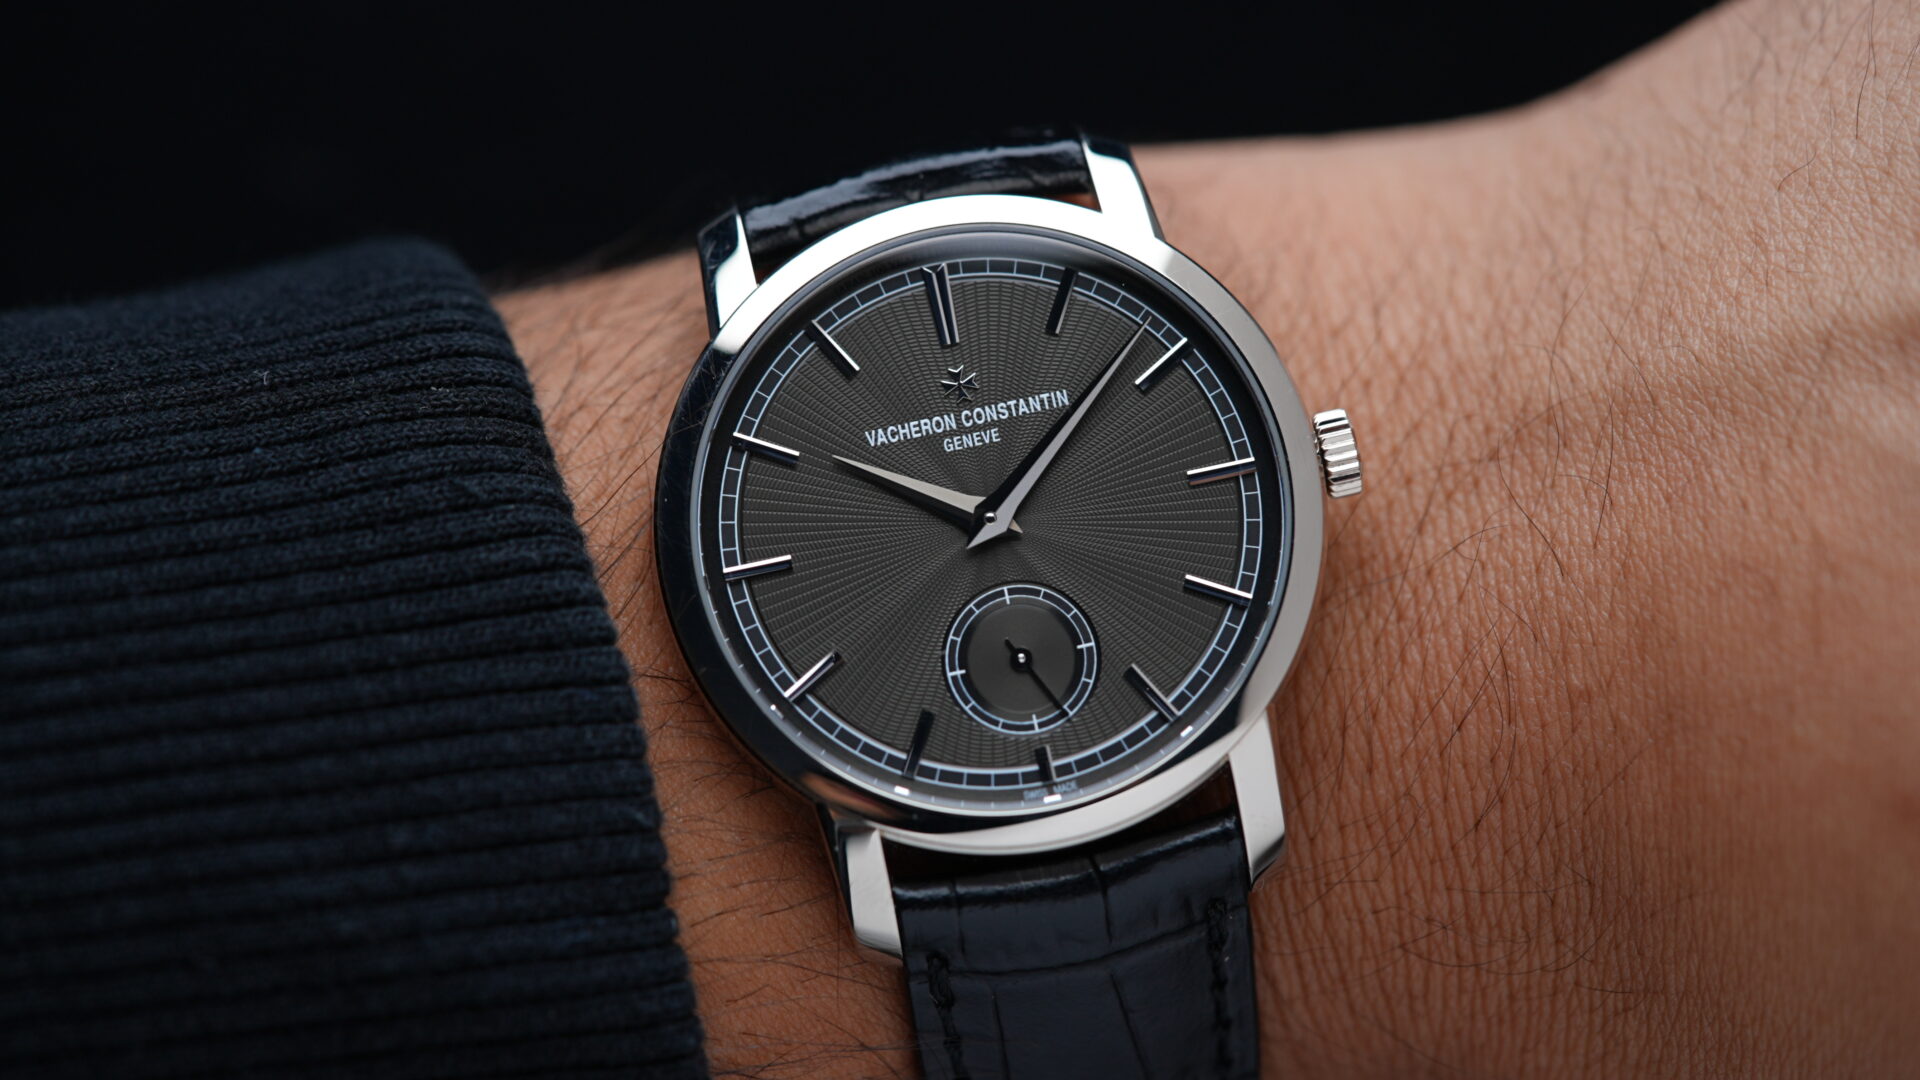 Vacheron Constantin Patrimony Traditional Japan 100th Anniversary watch featured on the wrist.